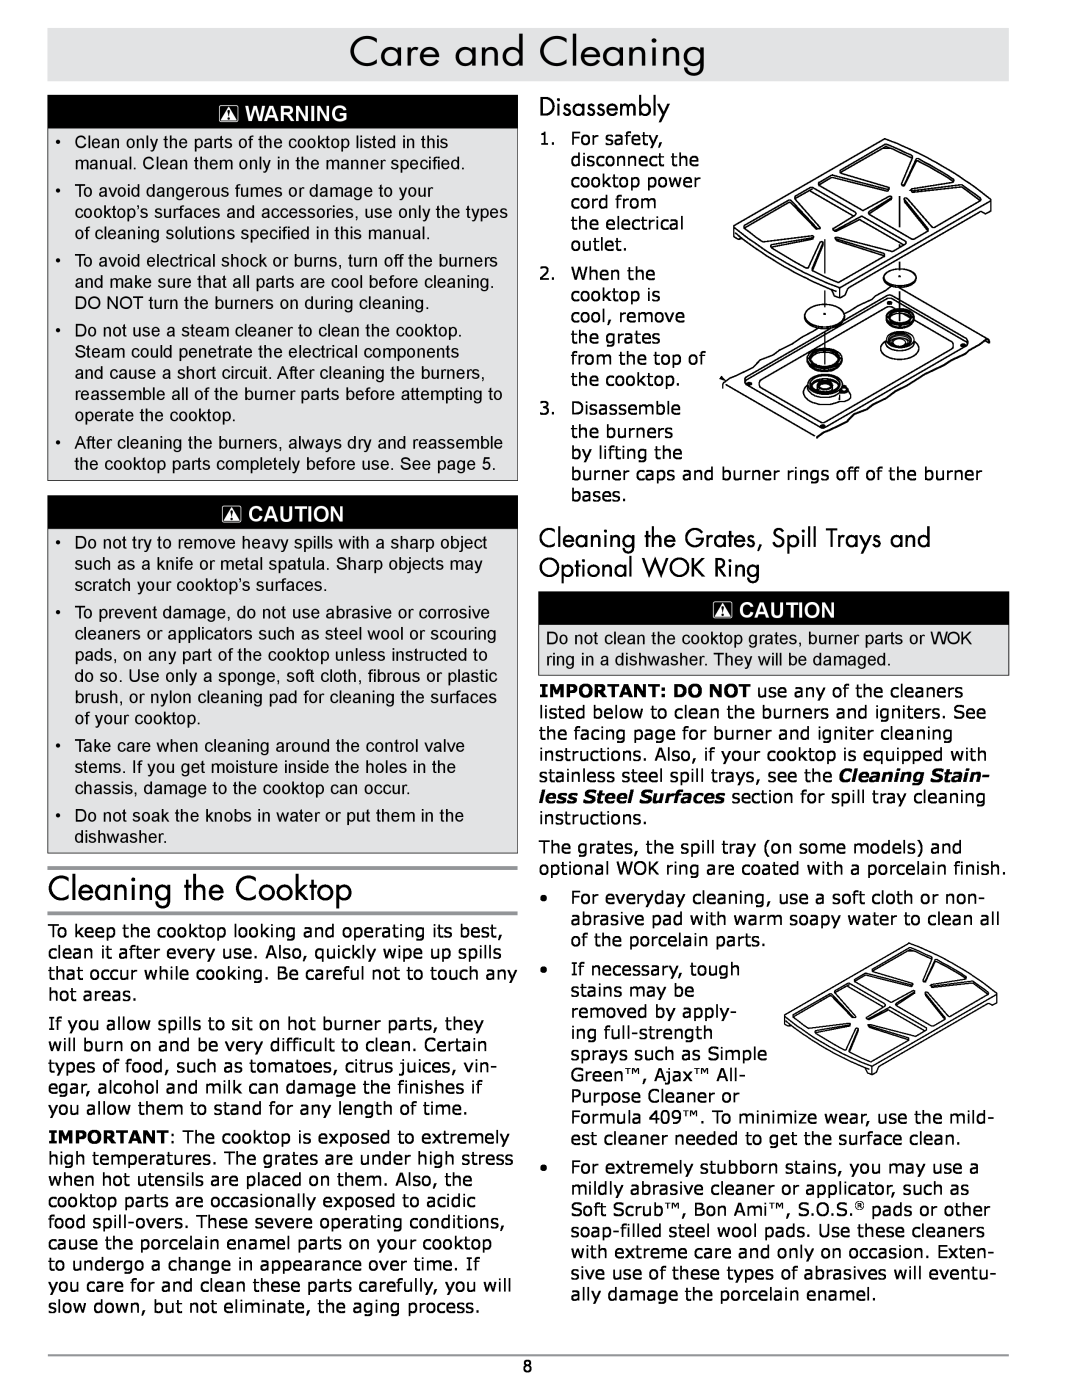 Sears SGM304, SGM466, SGM365 important safety instructions Care and Cleaning, Cleaning the Cooktop, Disassembly 